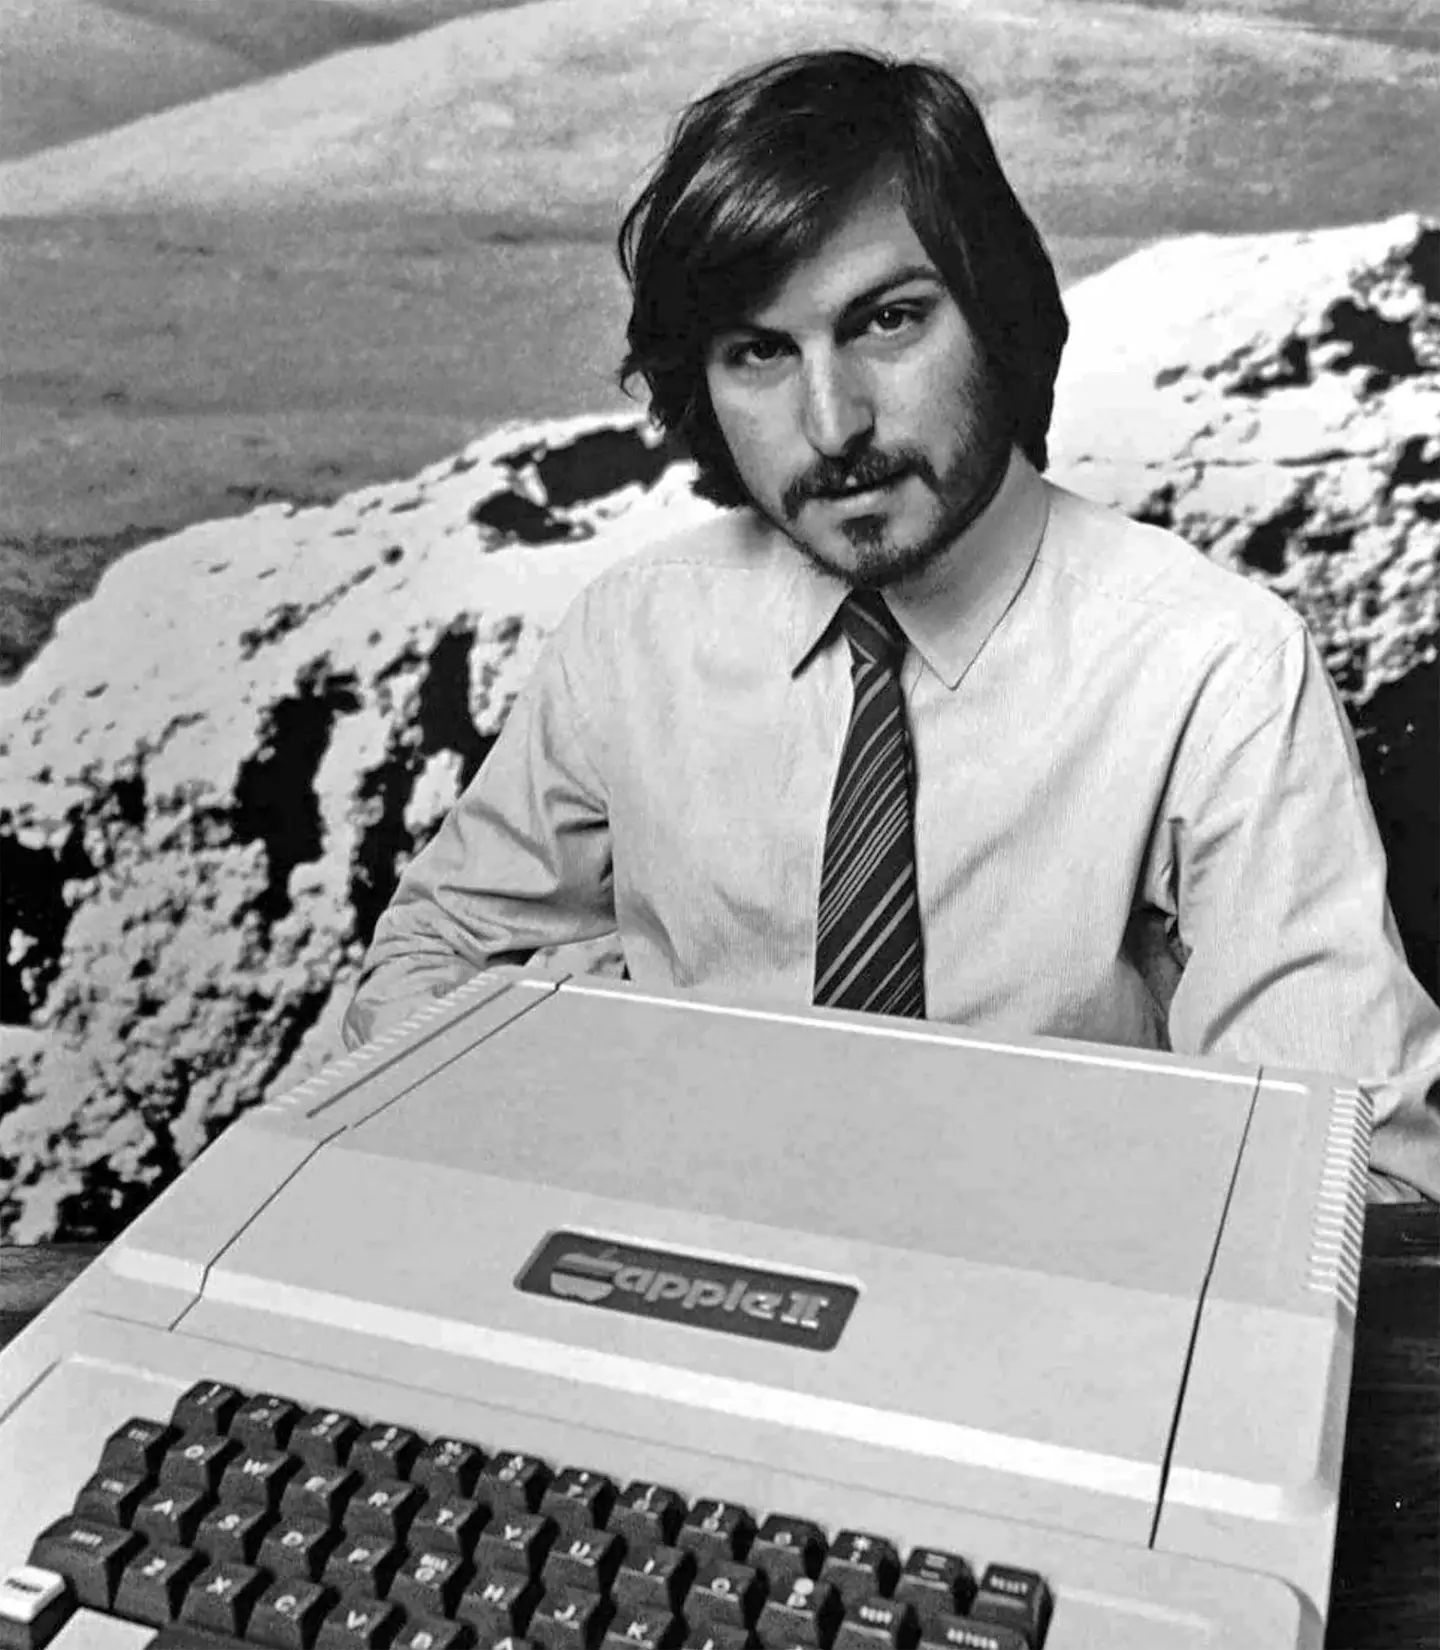 This Steve Jobs couldn't have foreseen how successful Apple would become.